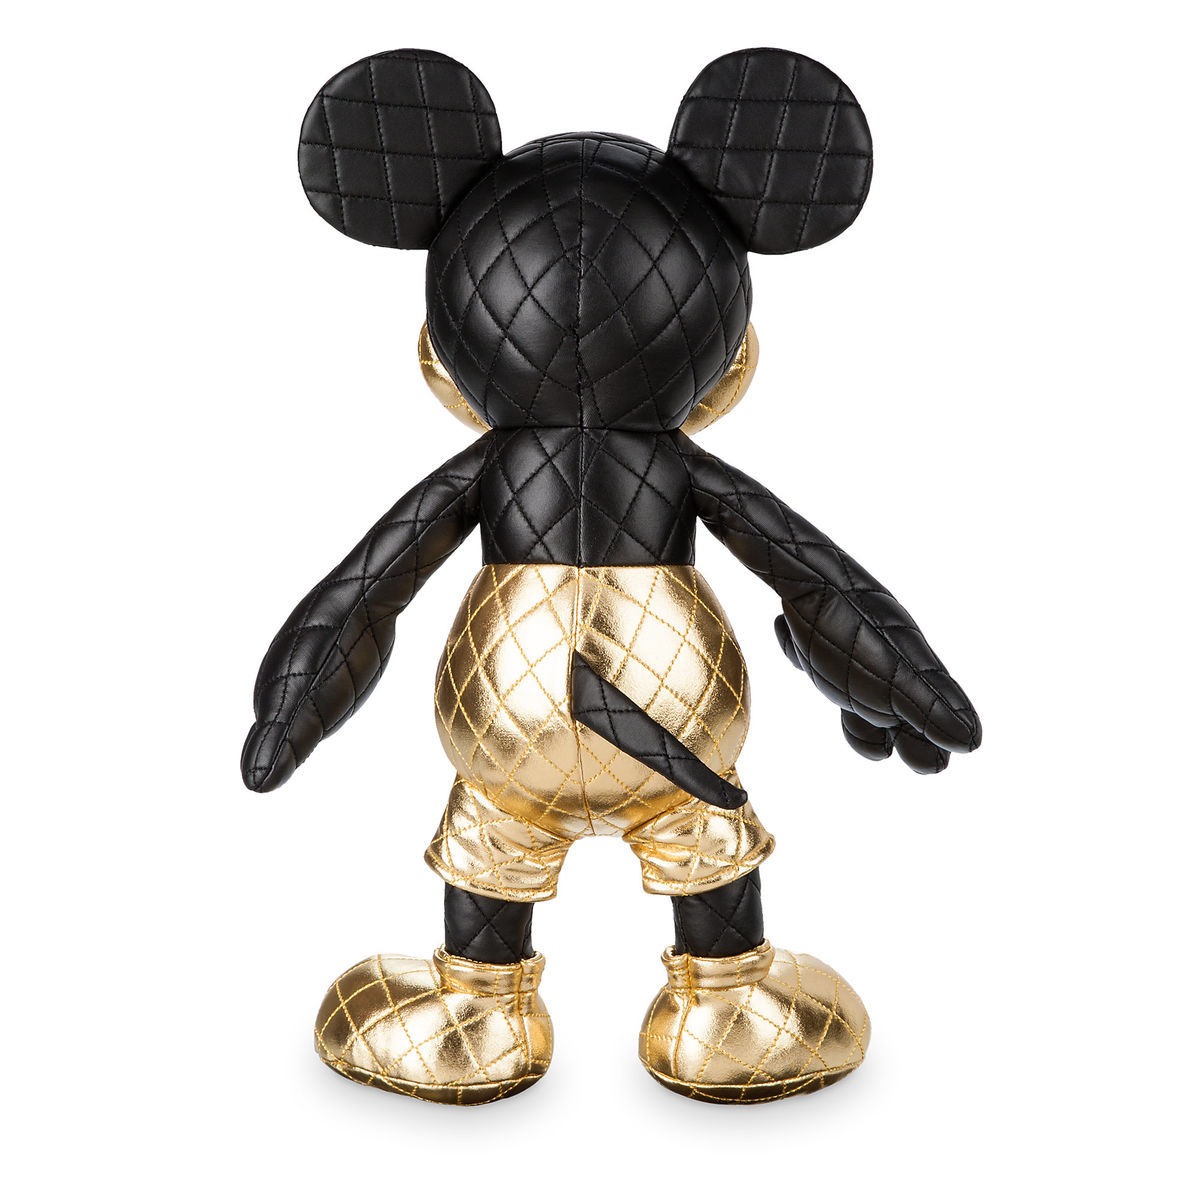 Disney Store Mickey Mouse Memories August Limited Plush New with Tags